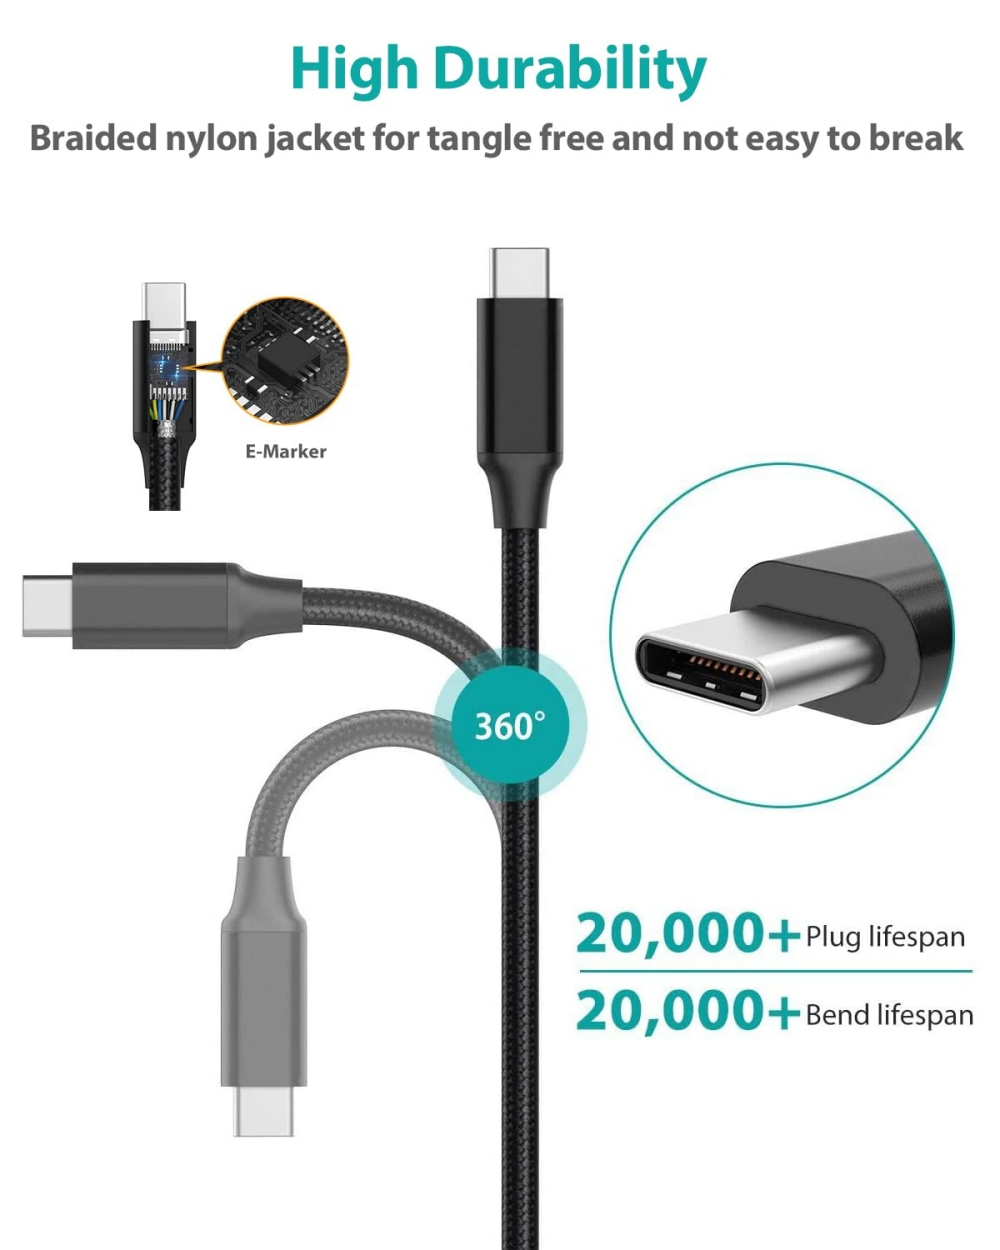 USB C 10Gbps USB 3.1 Gen 2 Cable